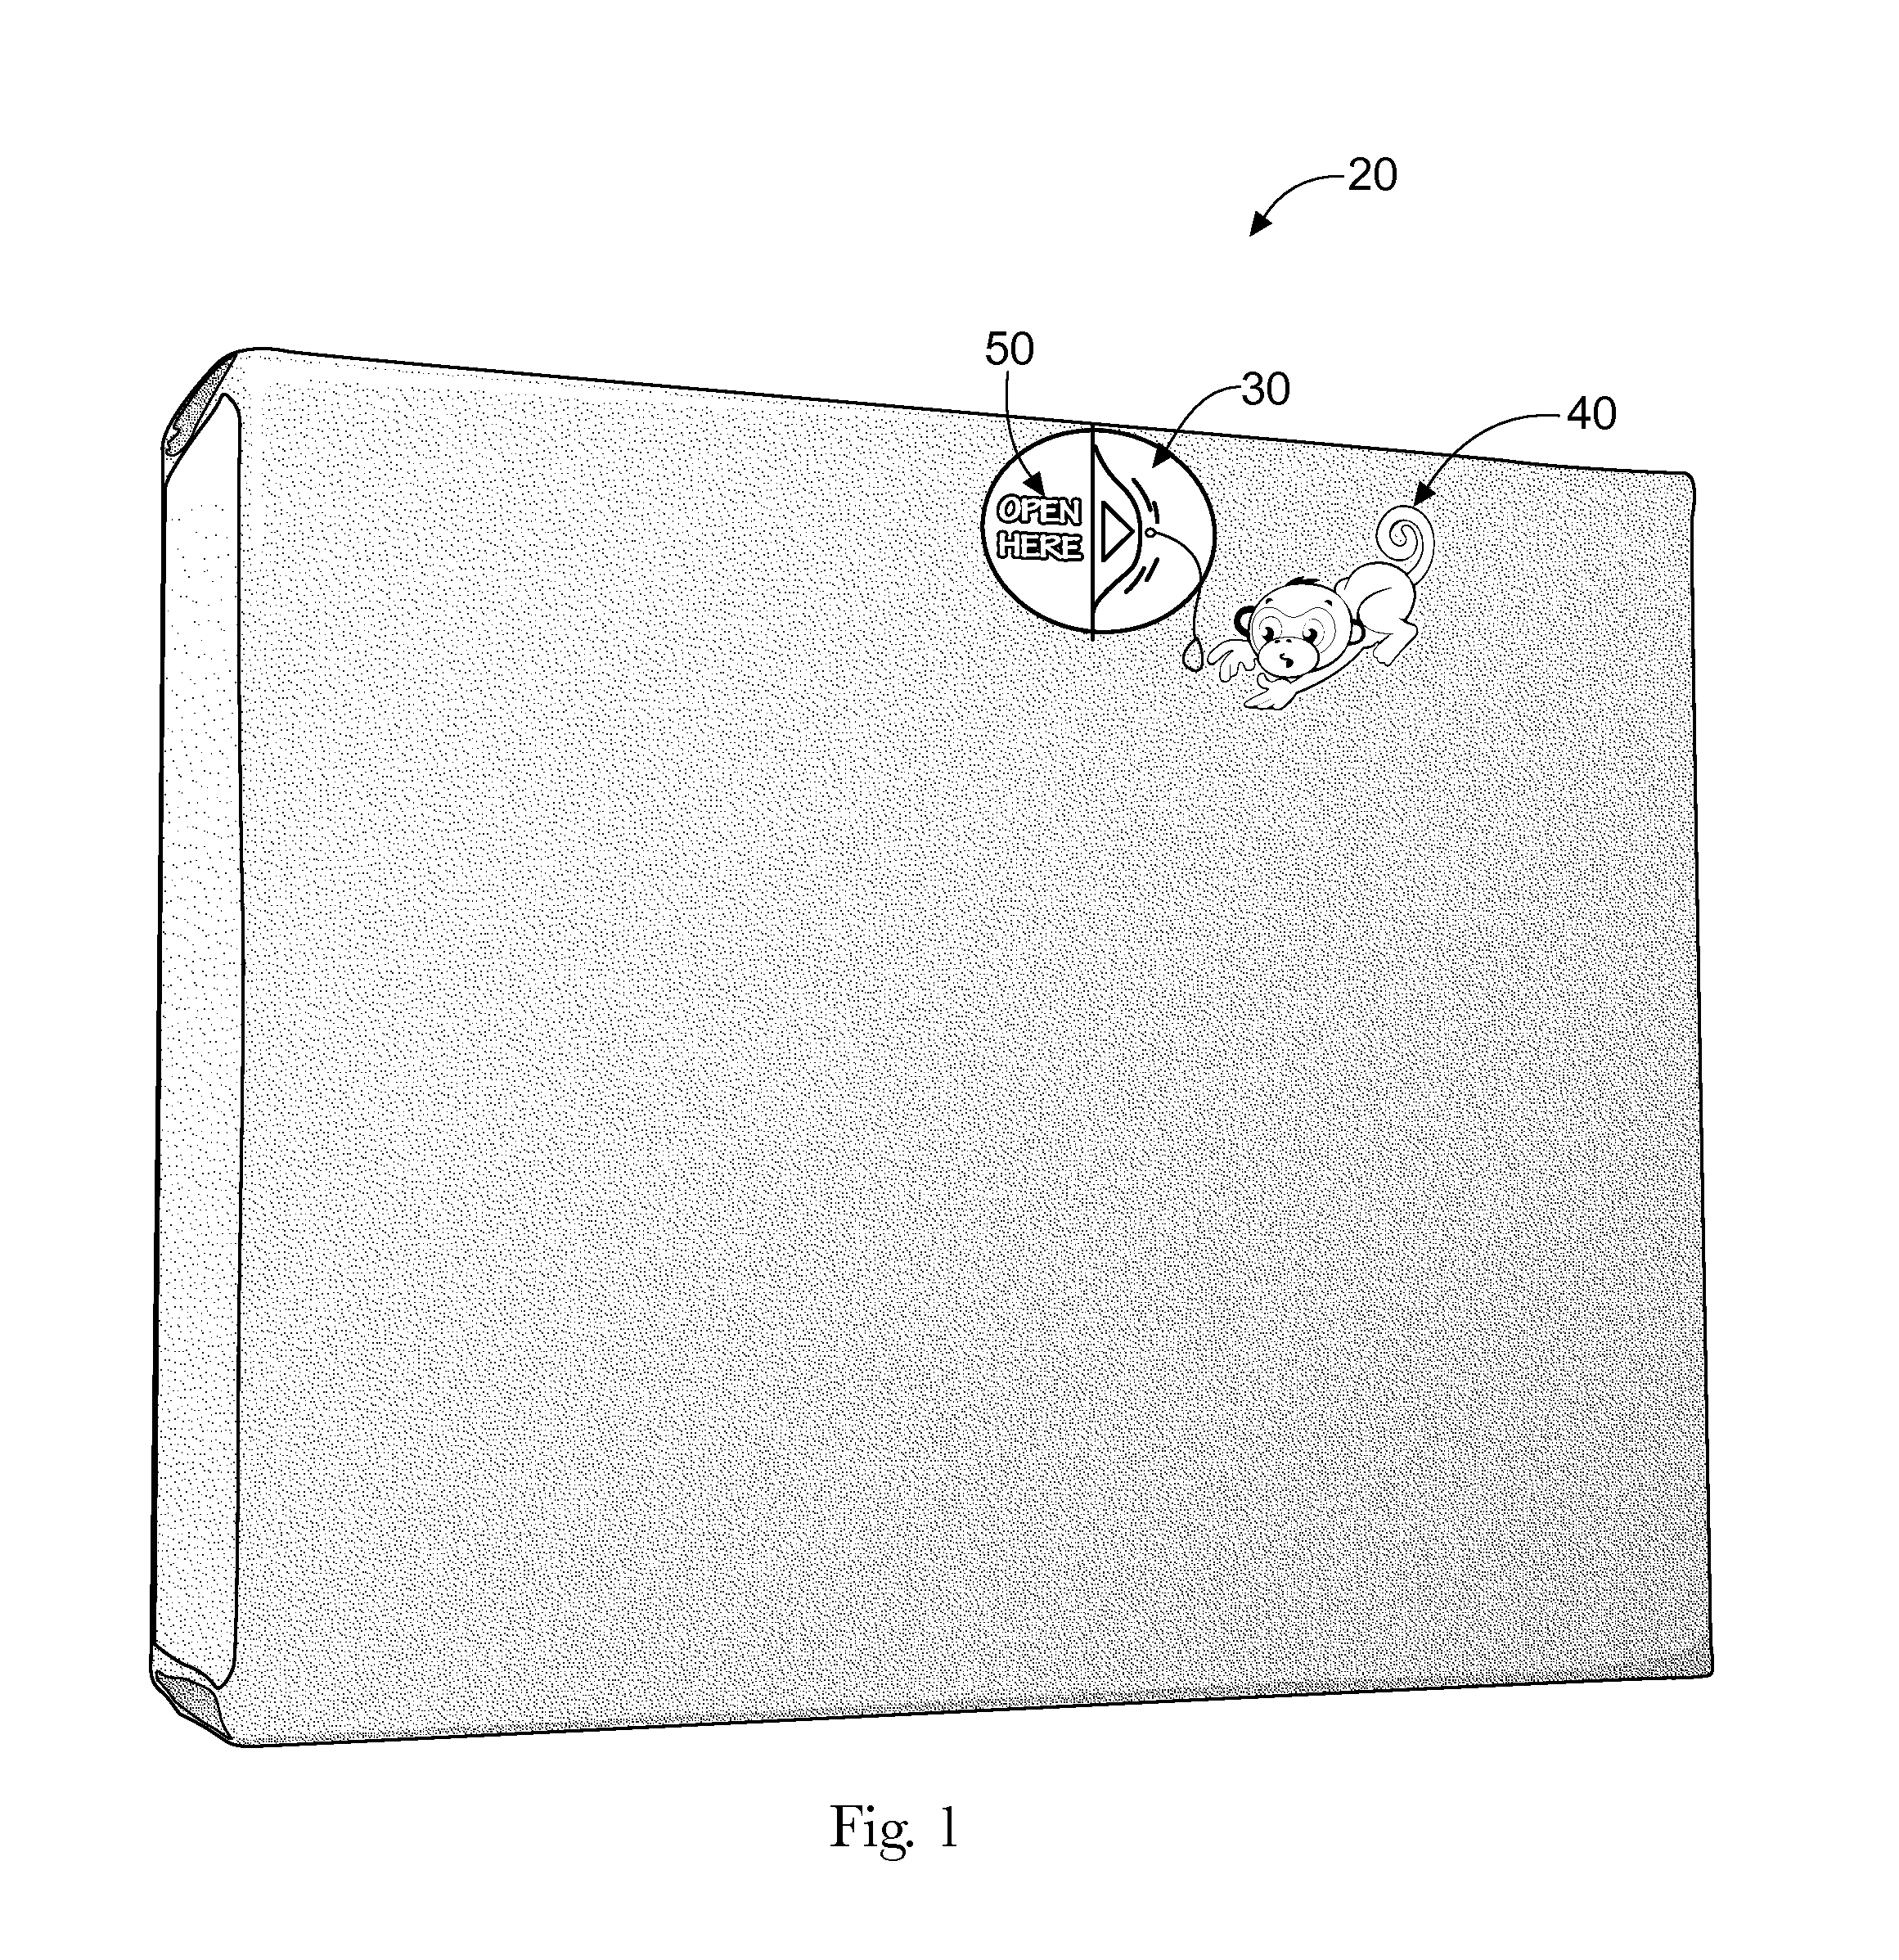 Packaging Containing Improved Dispensing And Carrying Elements